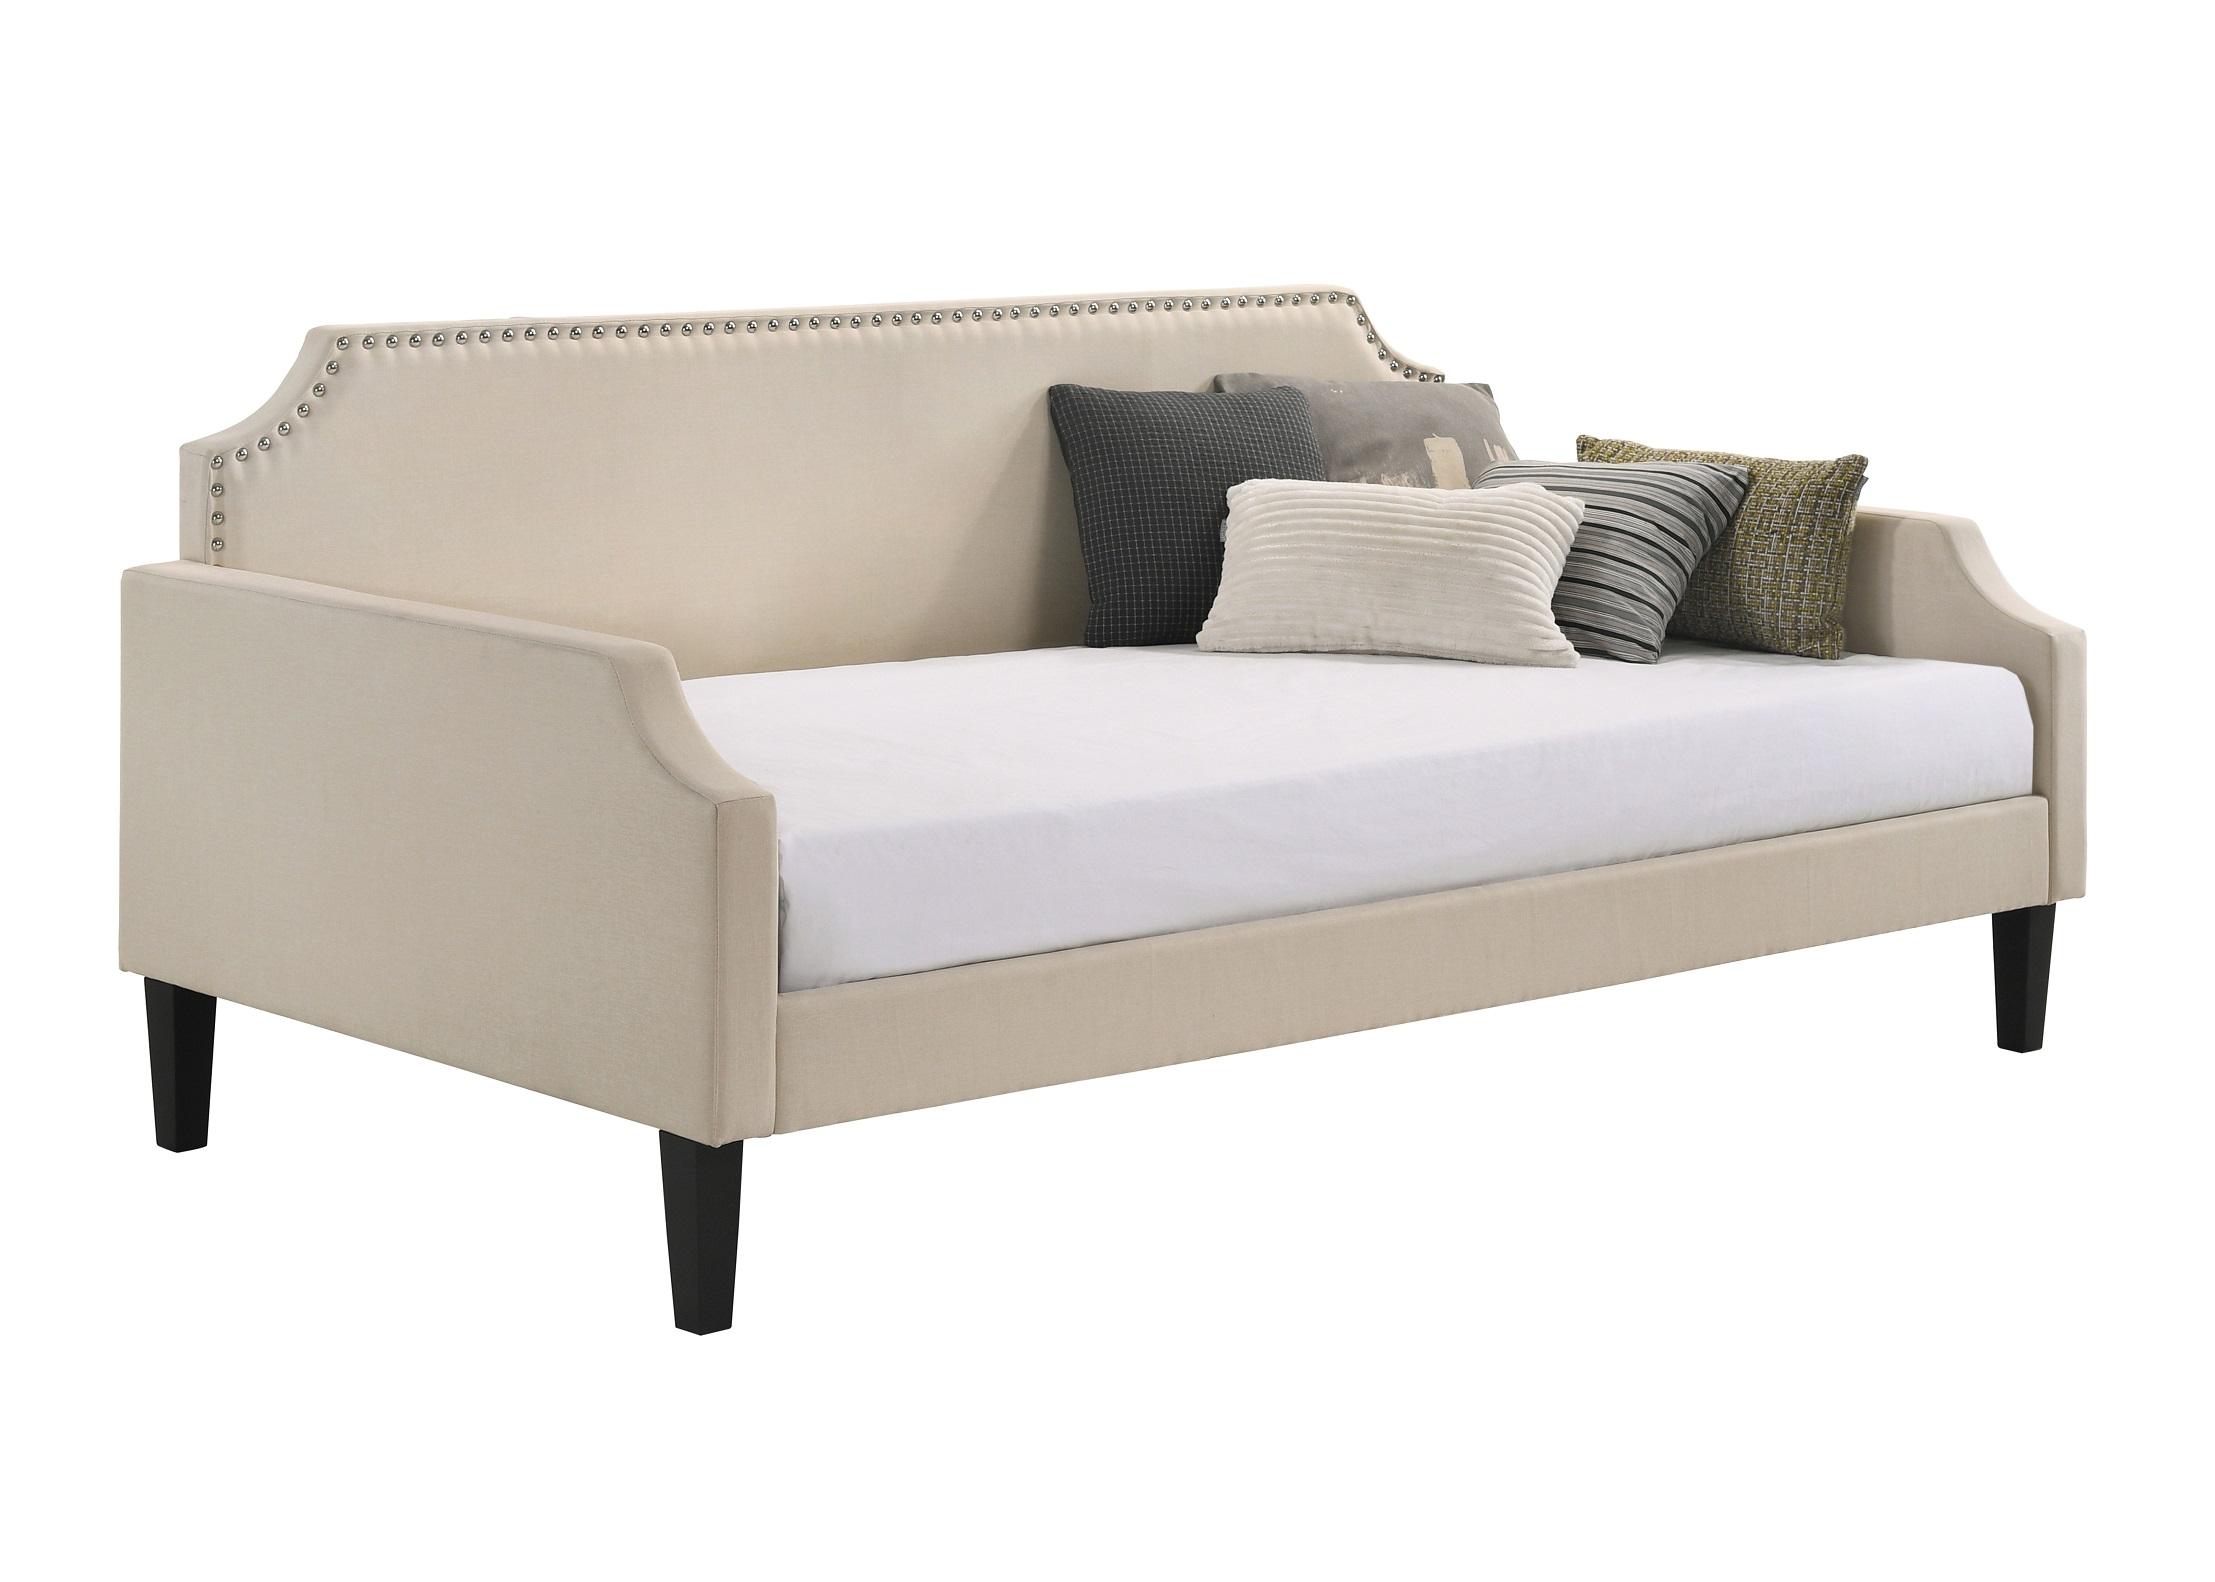 Transitional Daybed 300635 300635 in Taupe 